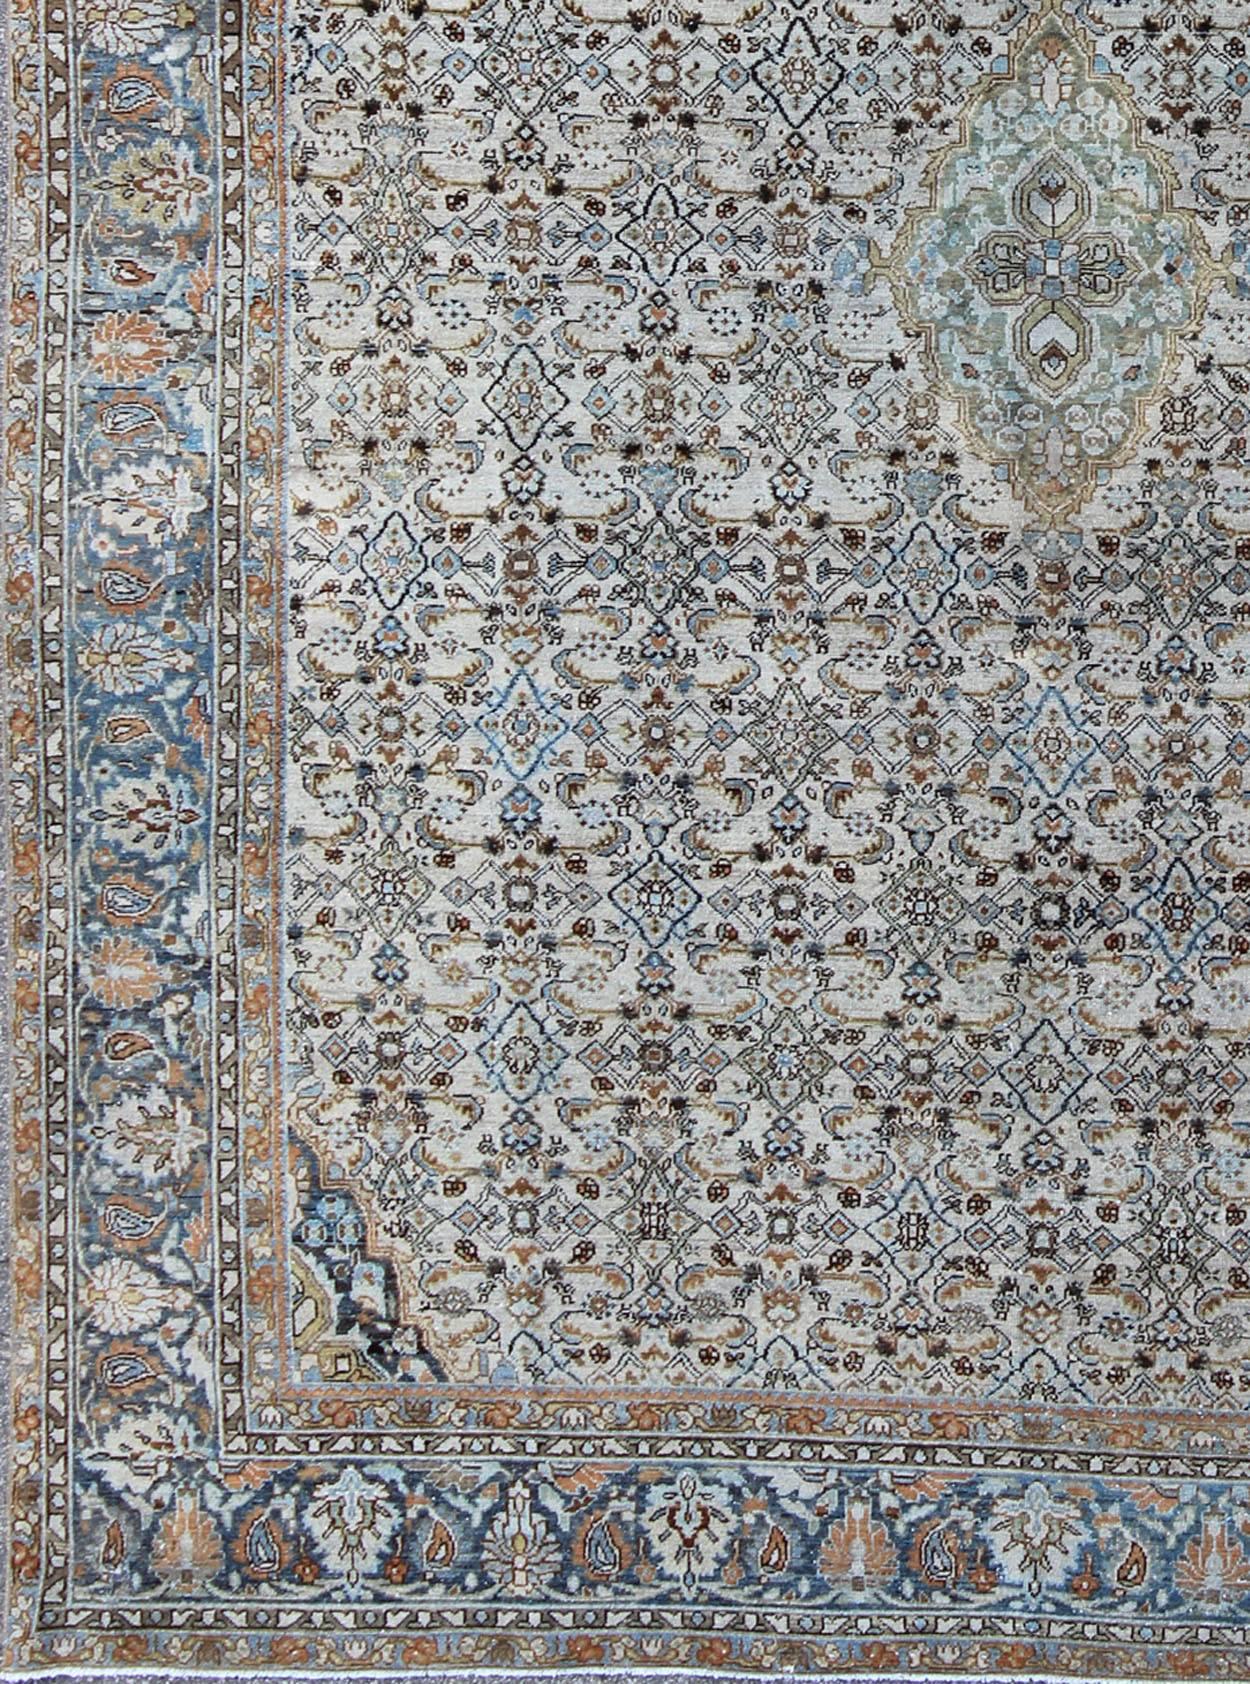 Antique Persian Malayer unique rug in steel blue border and ivory background. Rug/NA-160298.
This magnificent antique Persian Malayer carpet, of an impressive size, bears a beautiful, all-over Sub-geometric design paired with a delightful palette of